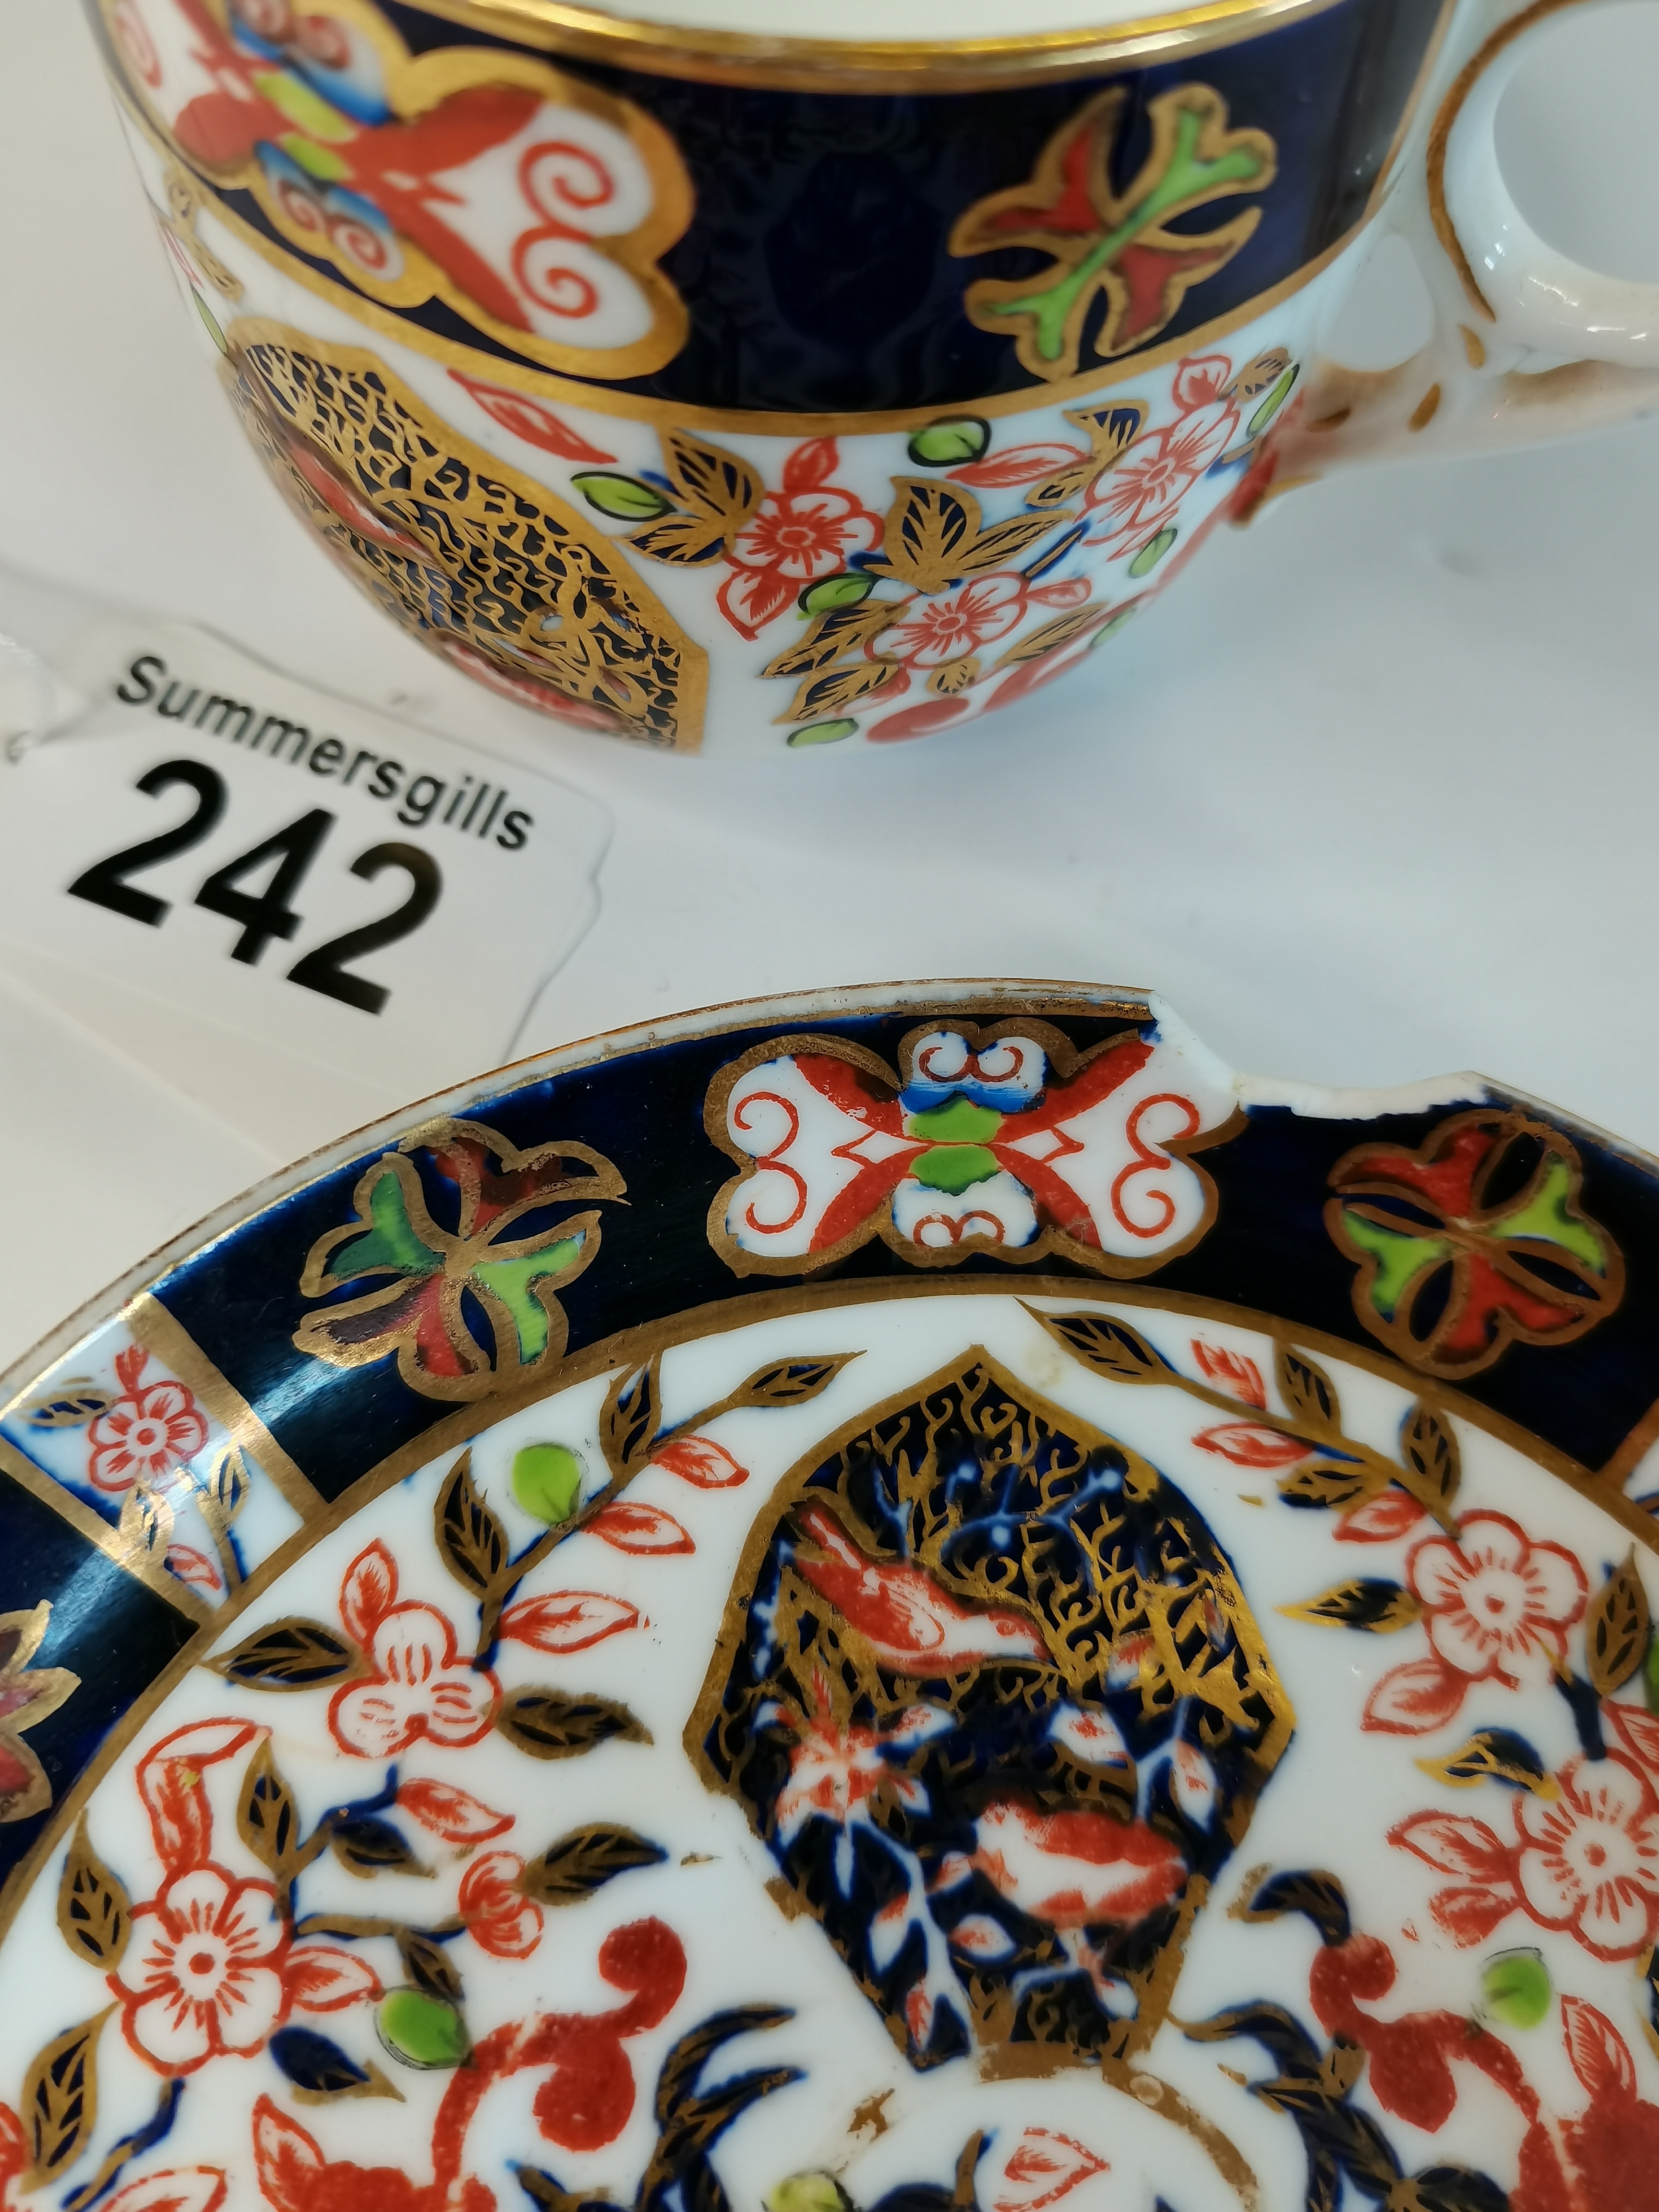 x4 Crown Derby cups and saucers - Image 4 of 6